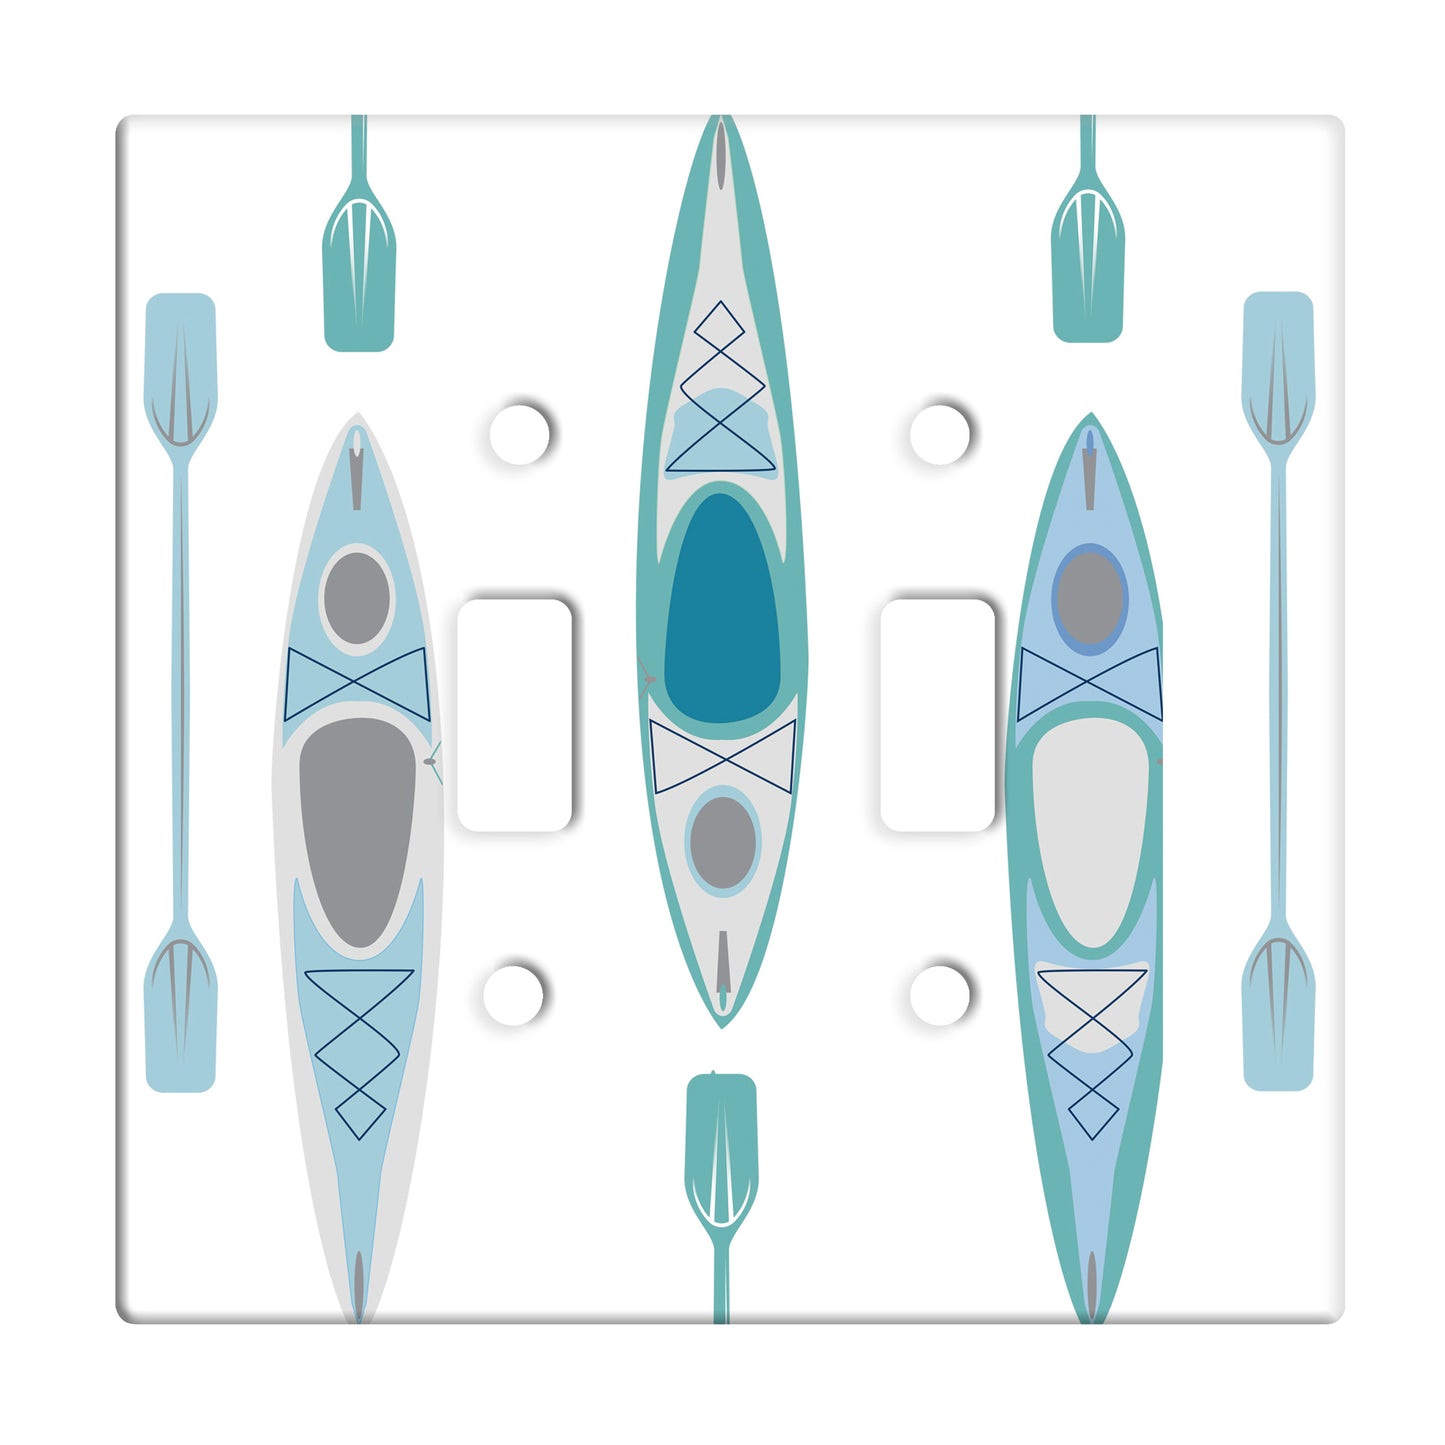 ceramic double toggle switch plate featuring alternating pattern of ores and kayaks in various shades of blue, green and white.